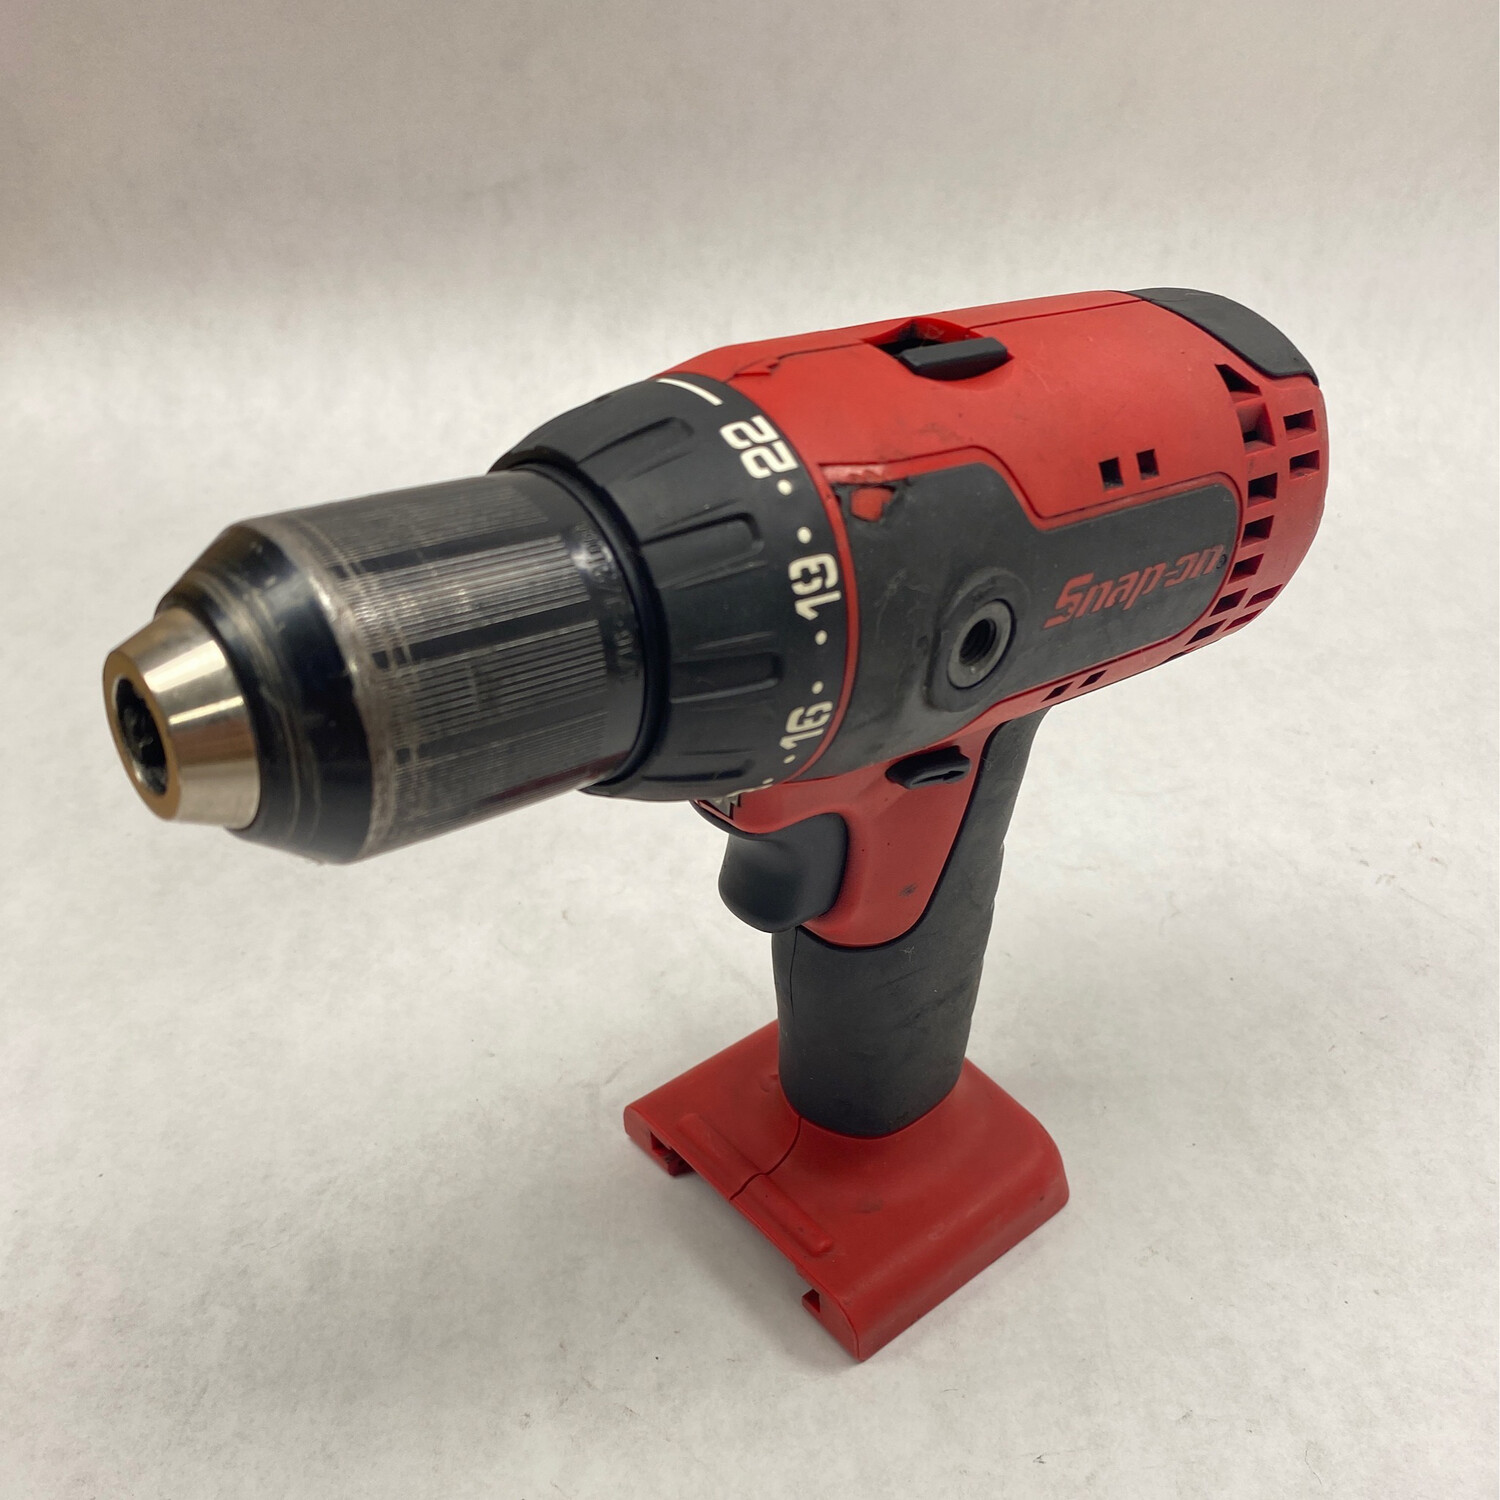 Snap On, 18 Volt 1/2” Monster Lithium Compact Cordless Drill, CDR8815